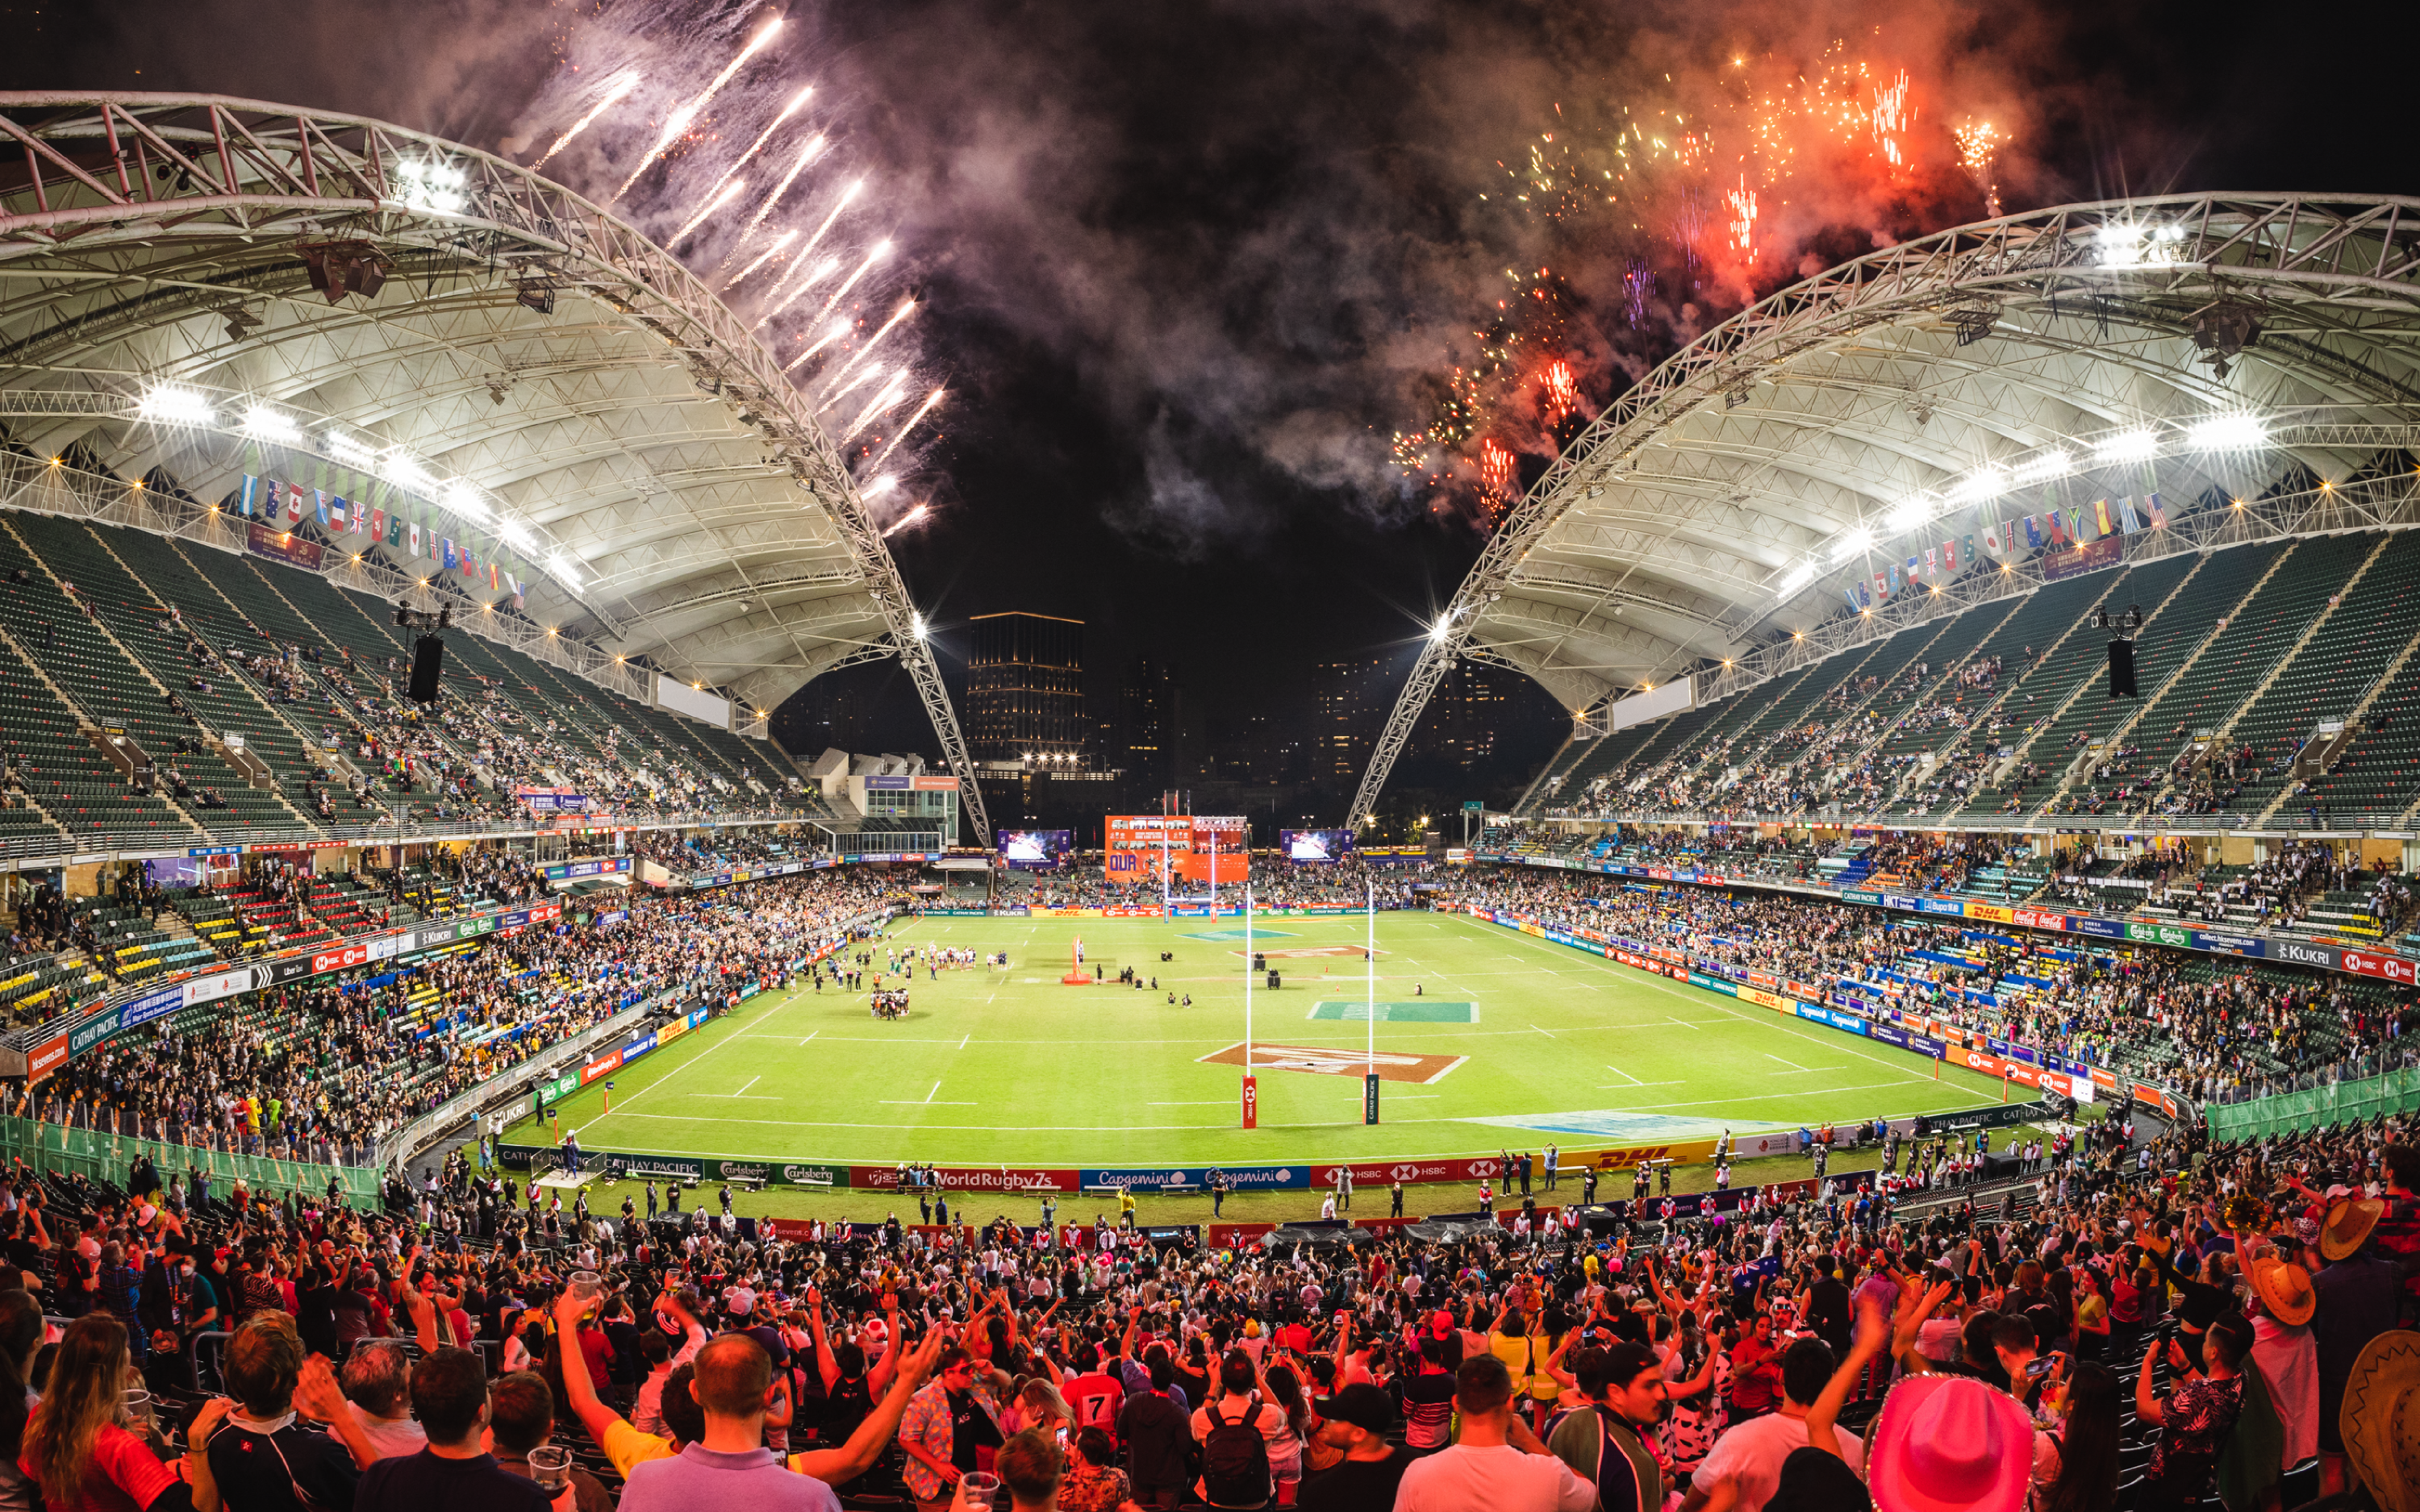 FLYING IN FOR THE HK7s? HERE ARE 7 THINGS YOU NEED TO KNOW